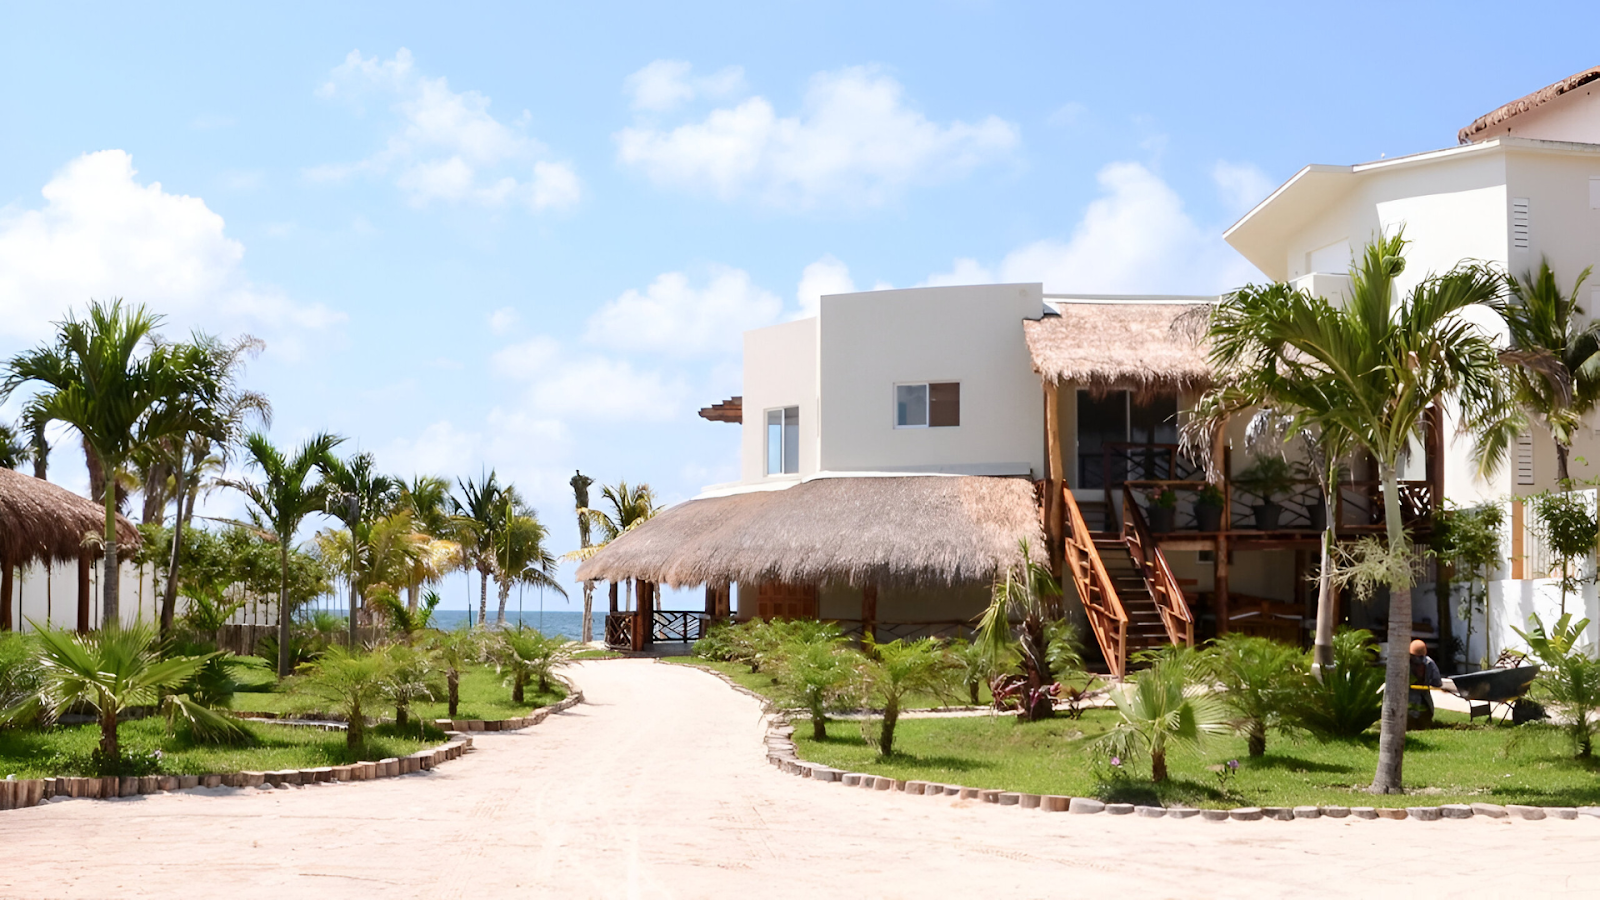 A secluded vacation rental in Cancun with thatched roofs and palm trees overlooking the ocean